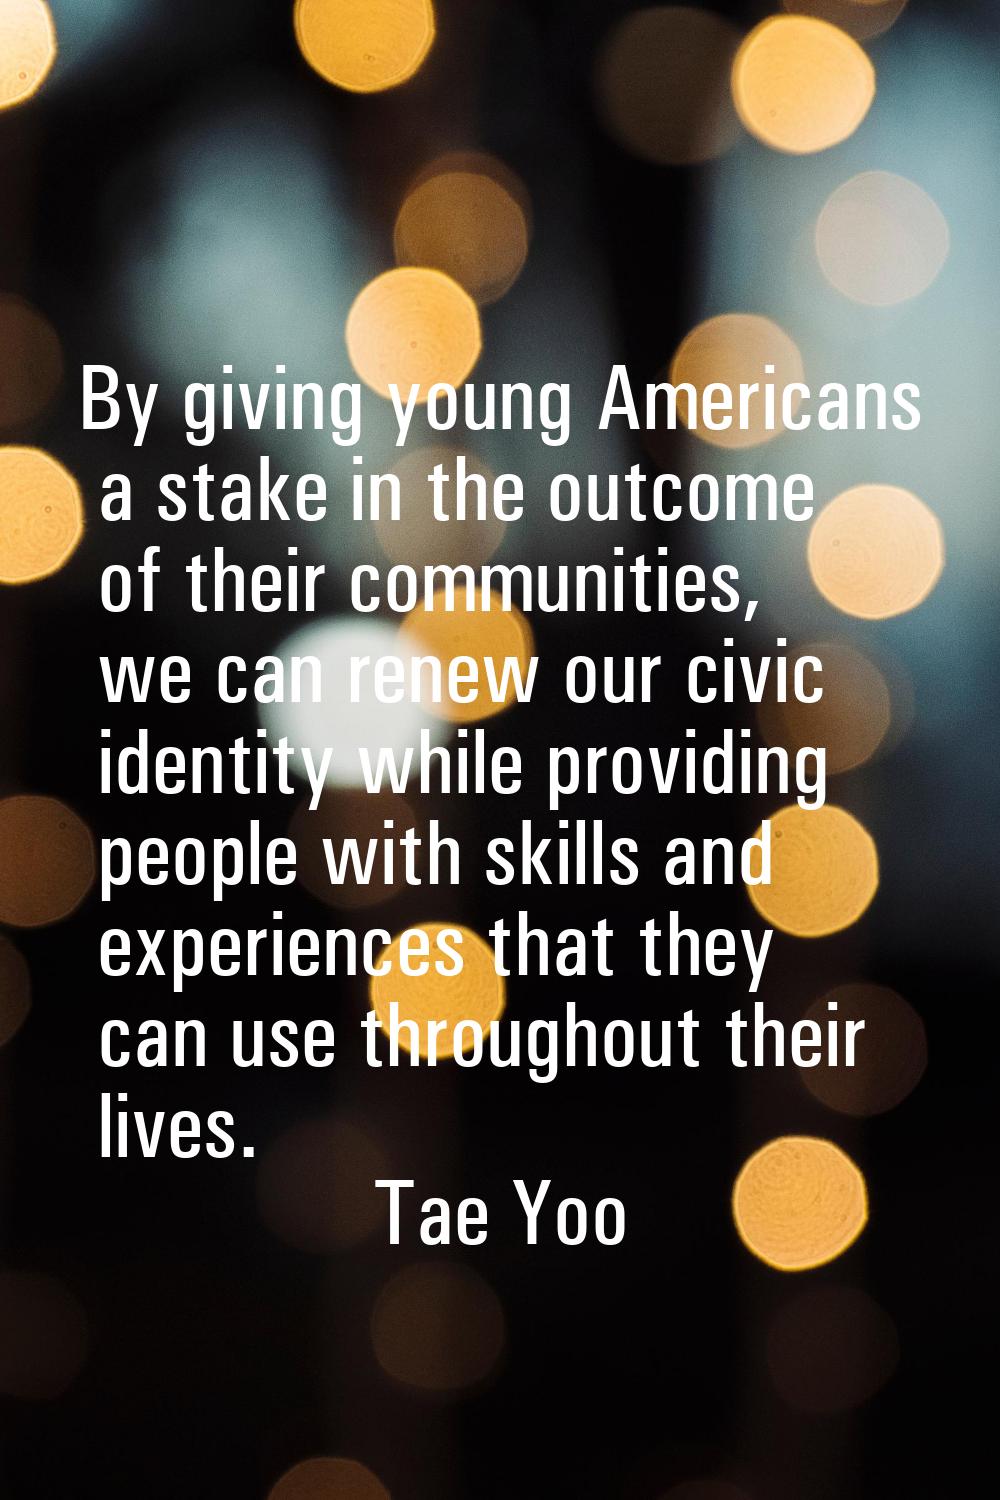 By giving young Americans a stake in the outcome of their communities, we can renew our civic ident